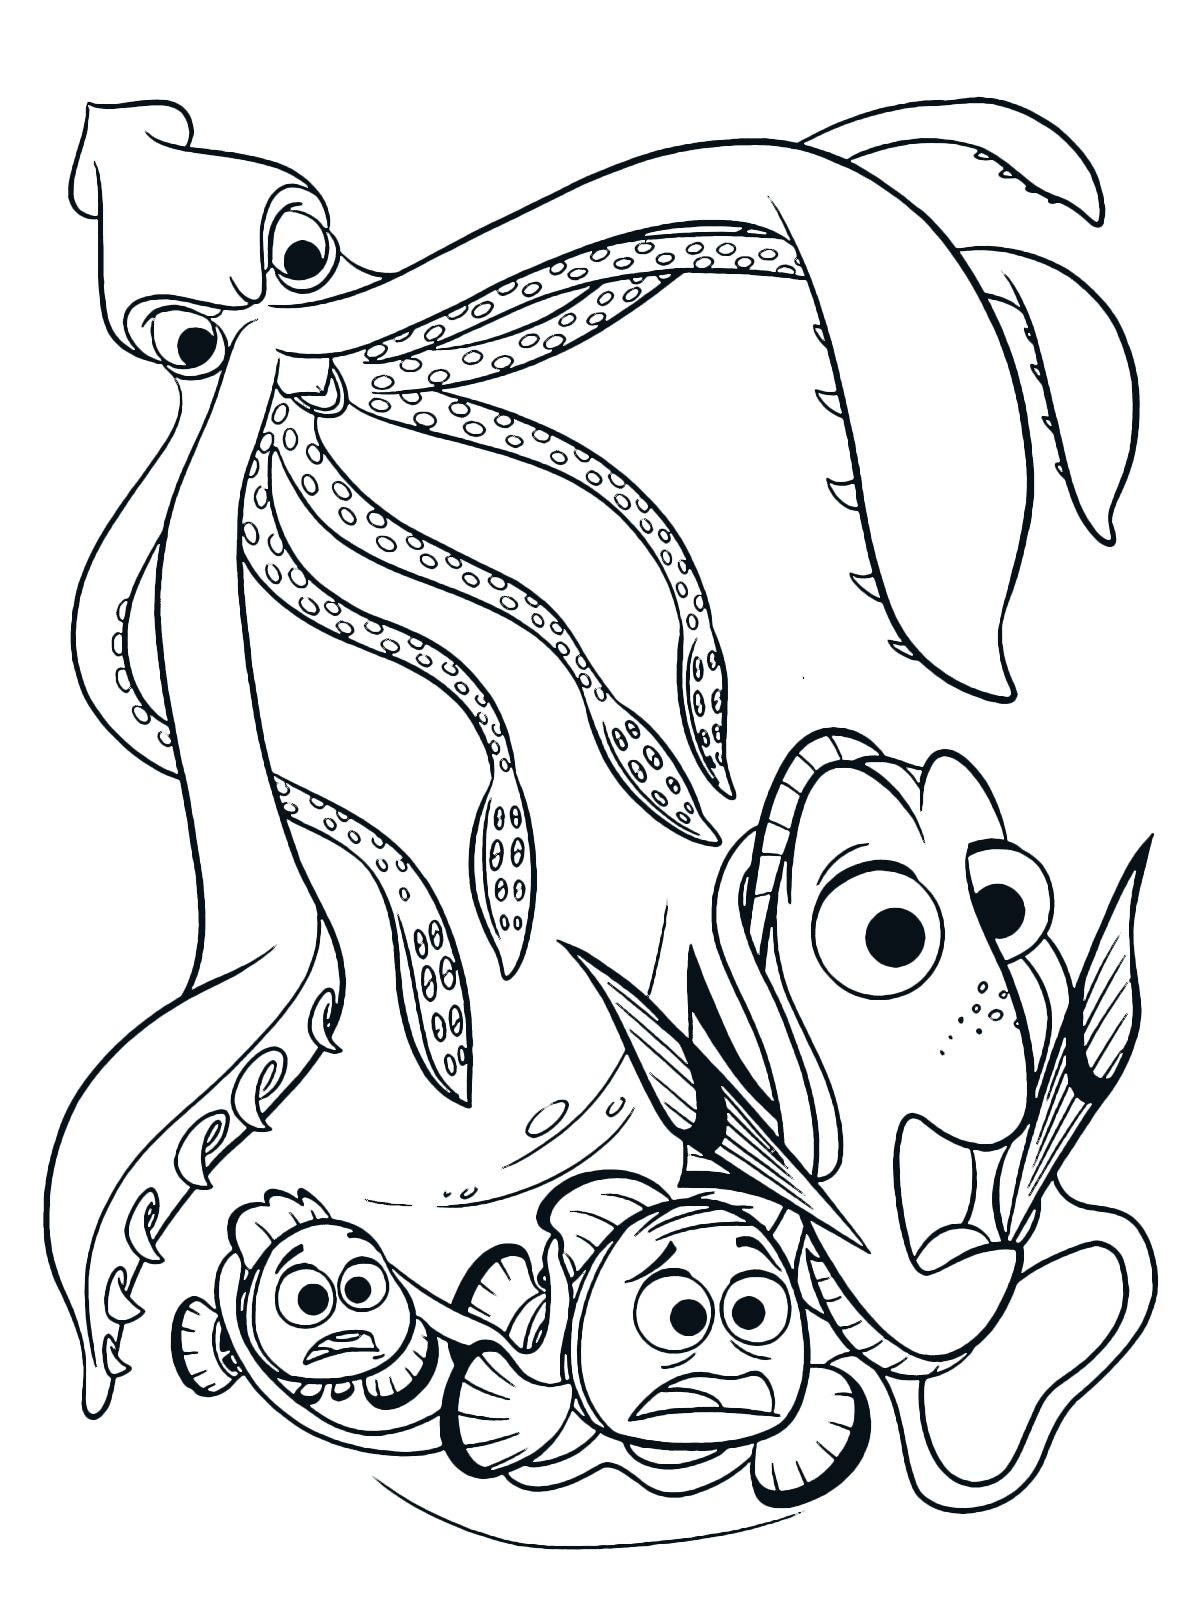 Finding Dory Coloring Page Free